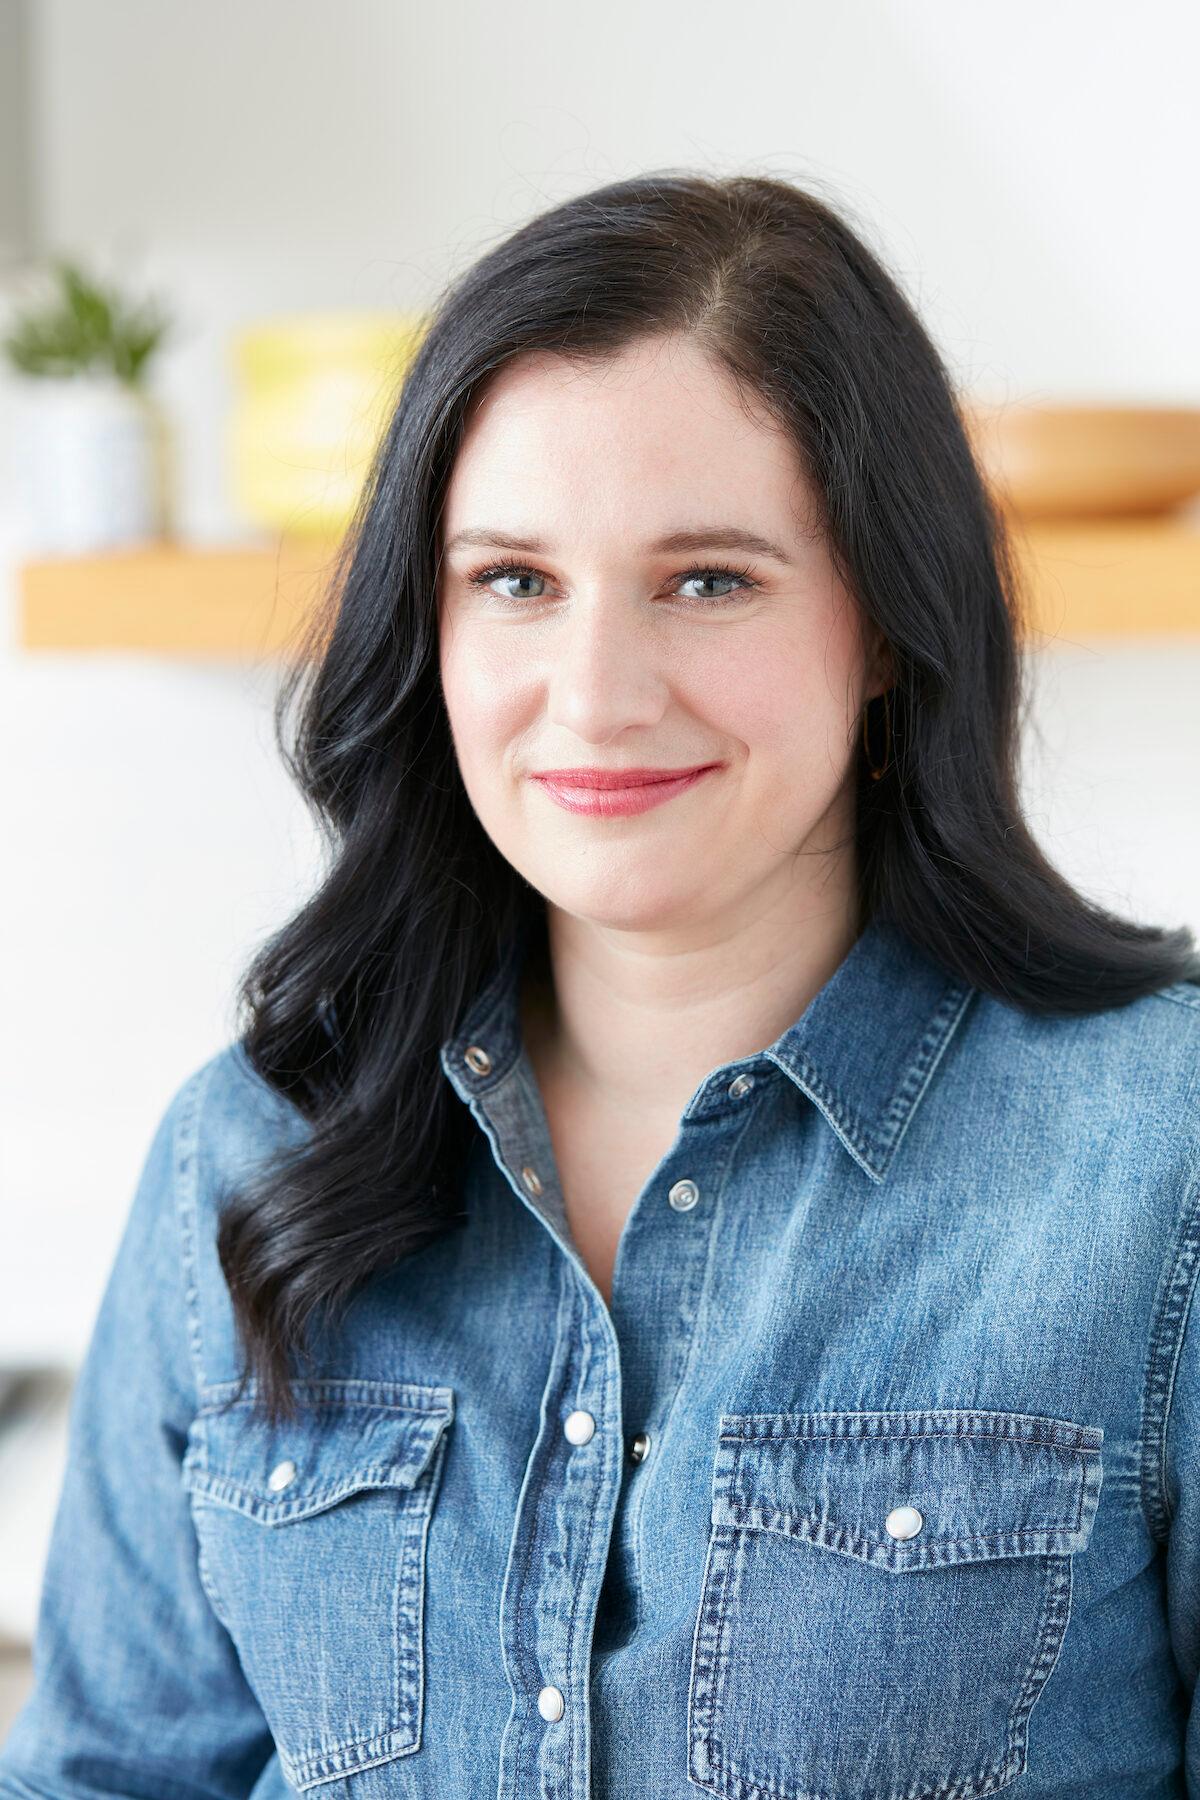 Cookbook author Leanne Brown. (Evi Abeler Photography)